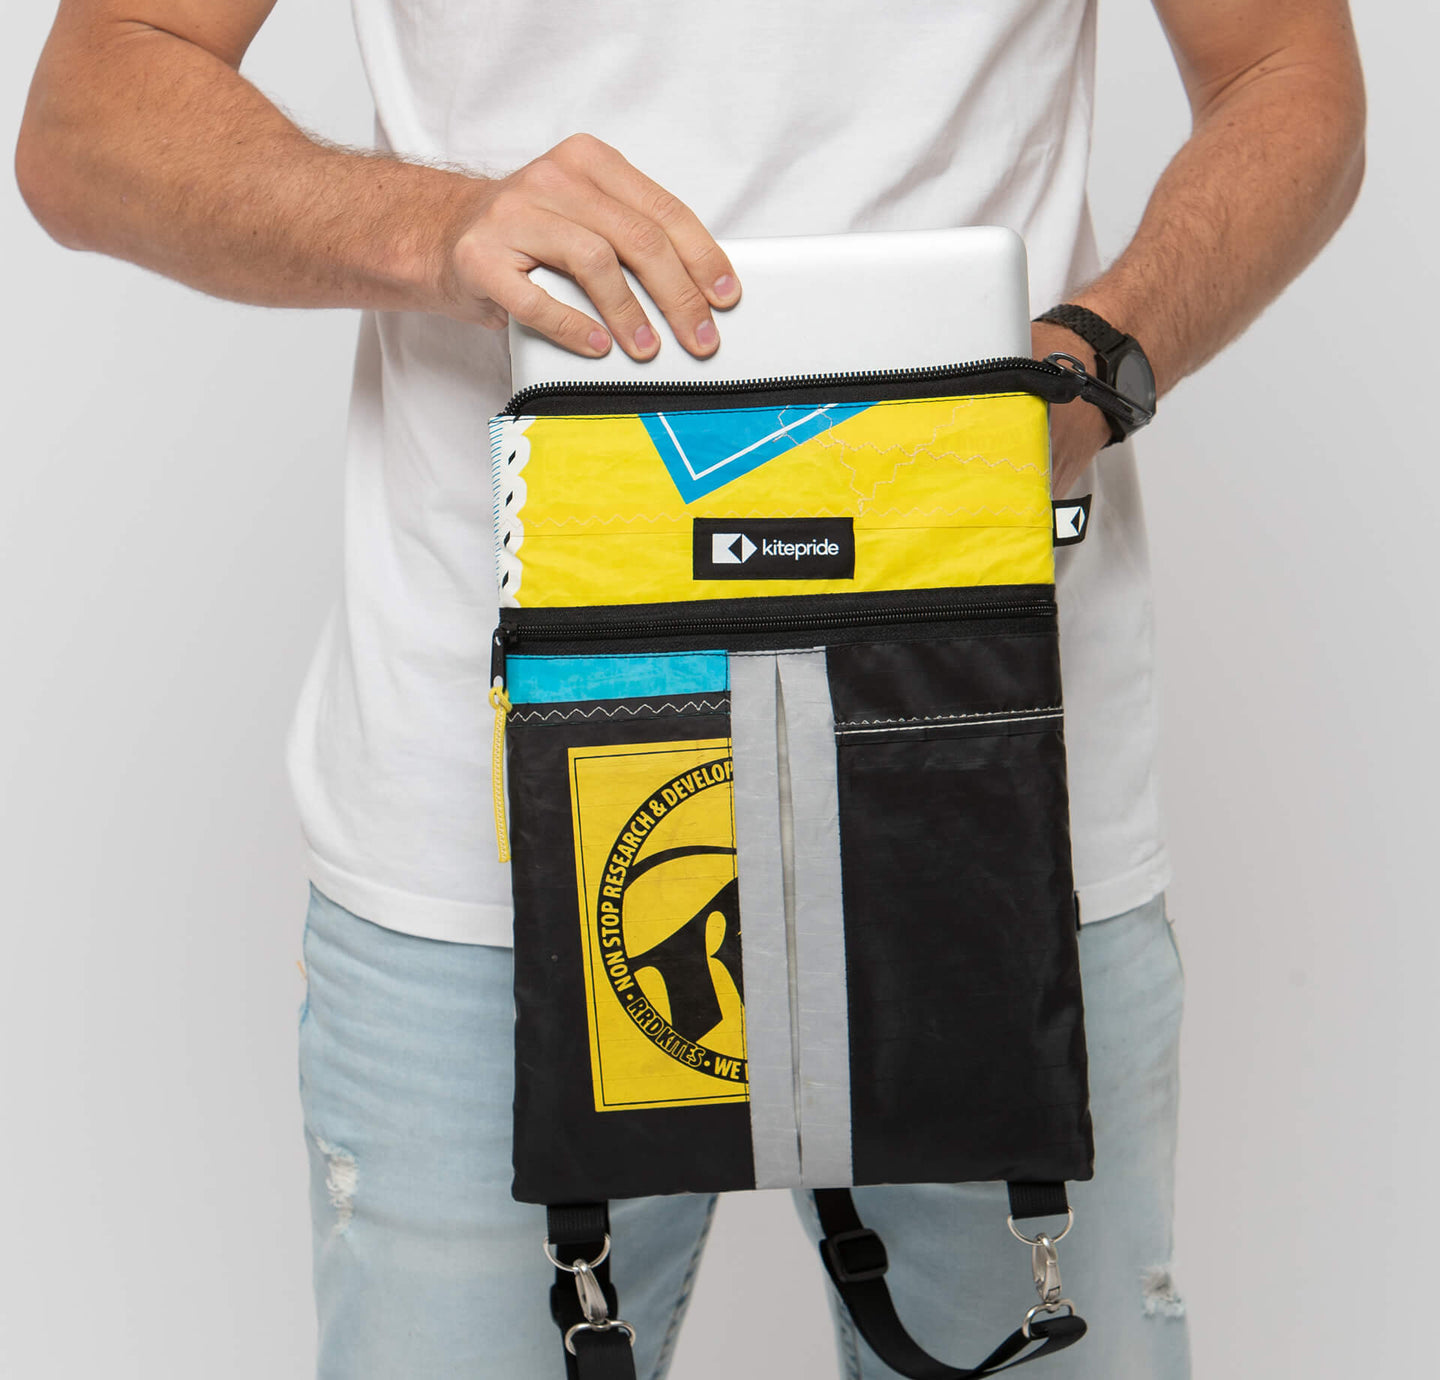 Sandi Laptop Sleeve 15'' with Straps - KitePride Sandi Laptop Sleeve 15'' with Straps - KitePride up-cycled recycled one of a kind fashion bags are repurposed from kitesurfing kite. Each bag 